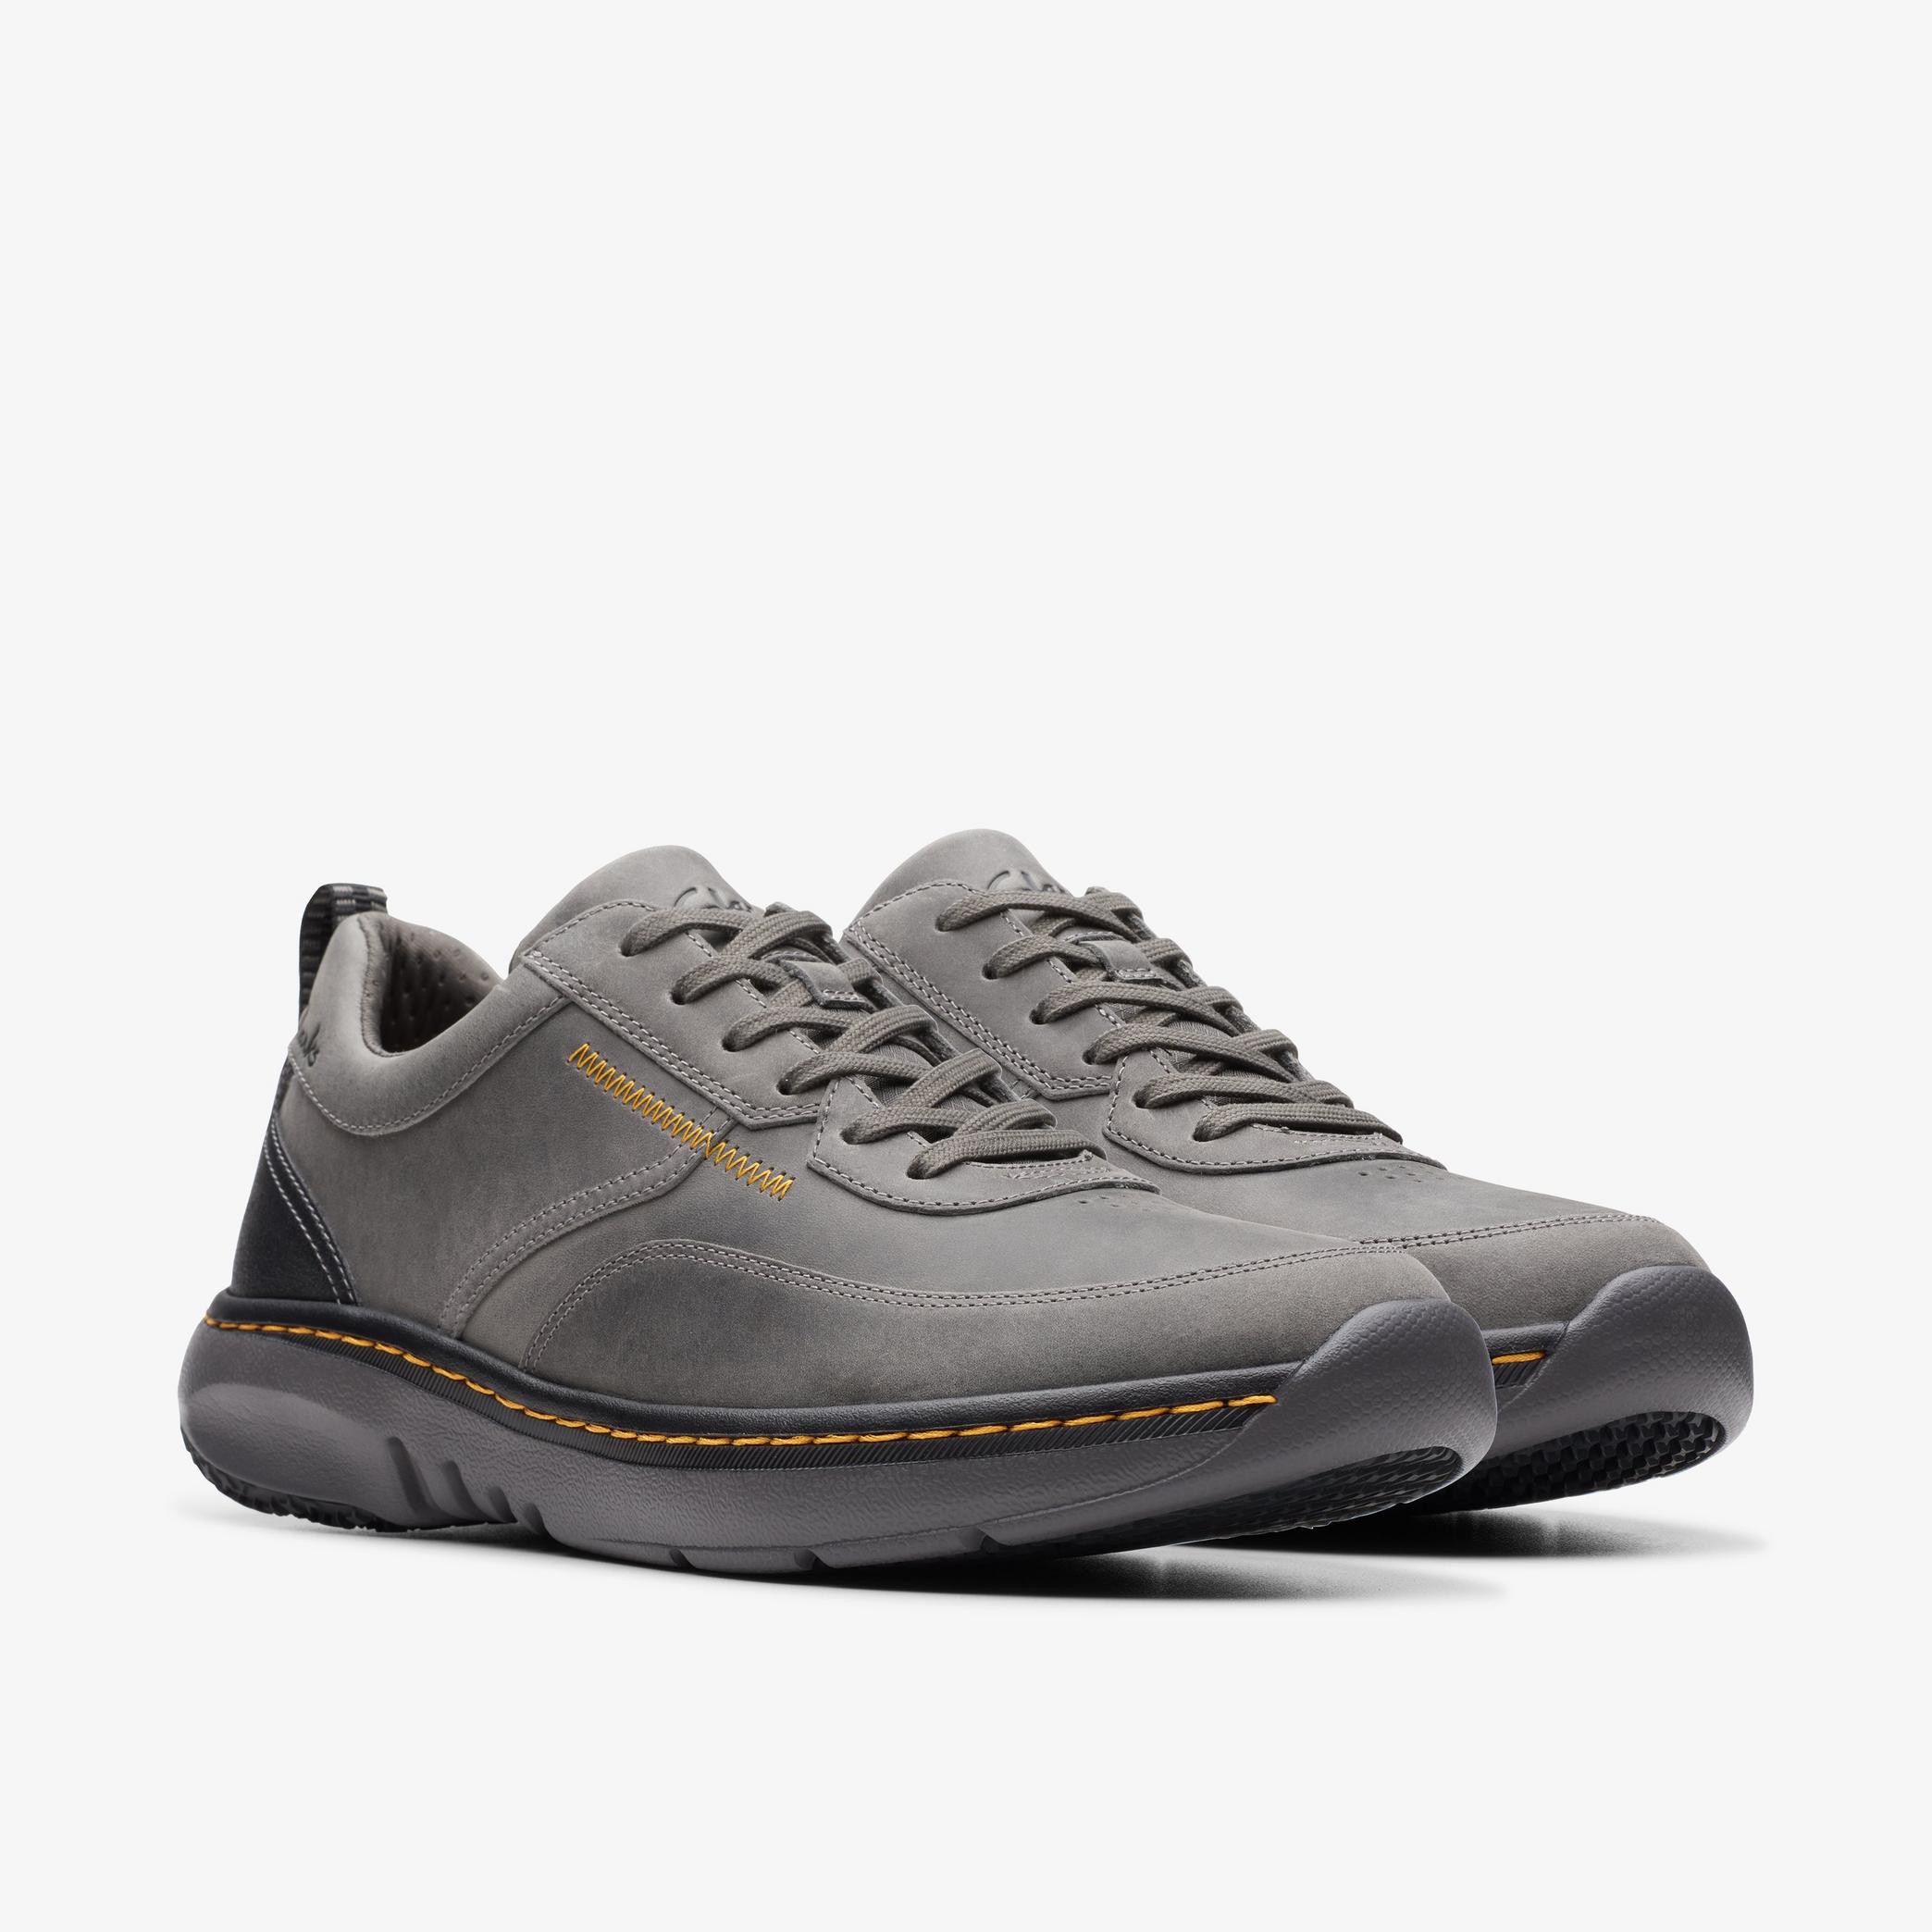 MENS Clarks Pro Lace Dark Grey Leather Trainers | Clarks Outlet